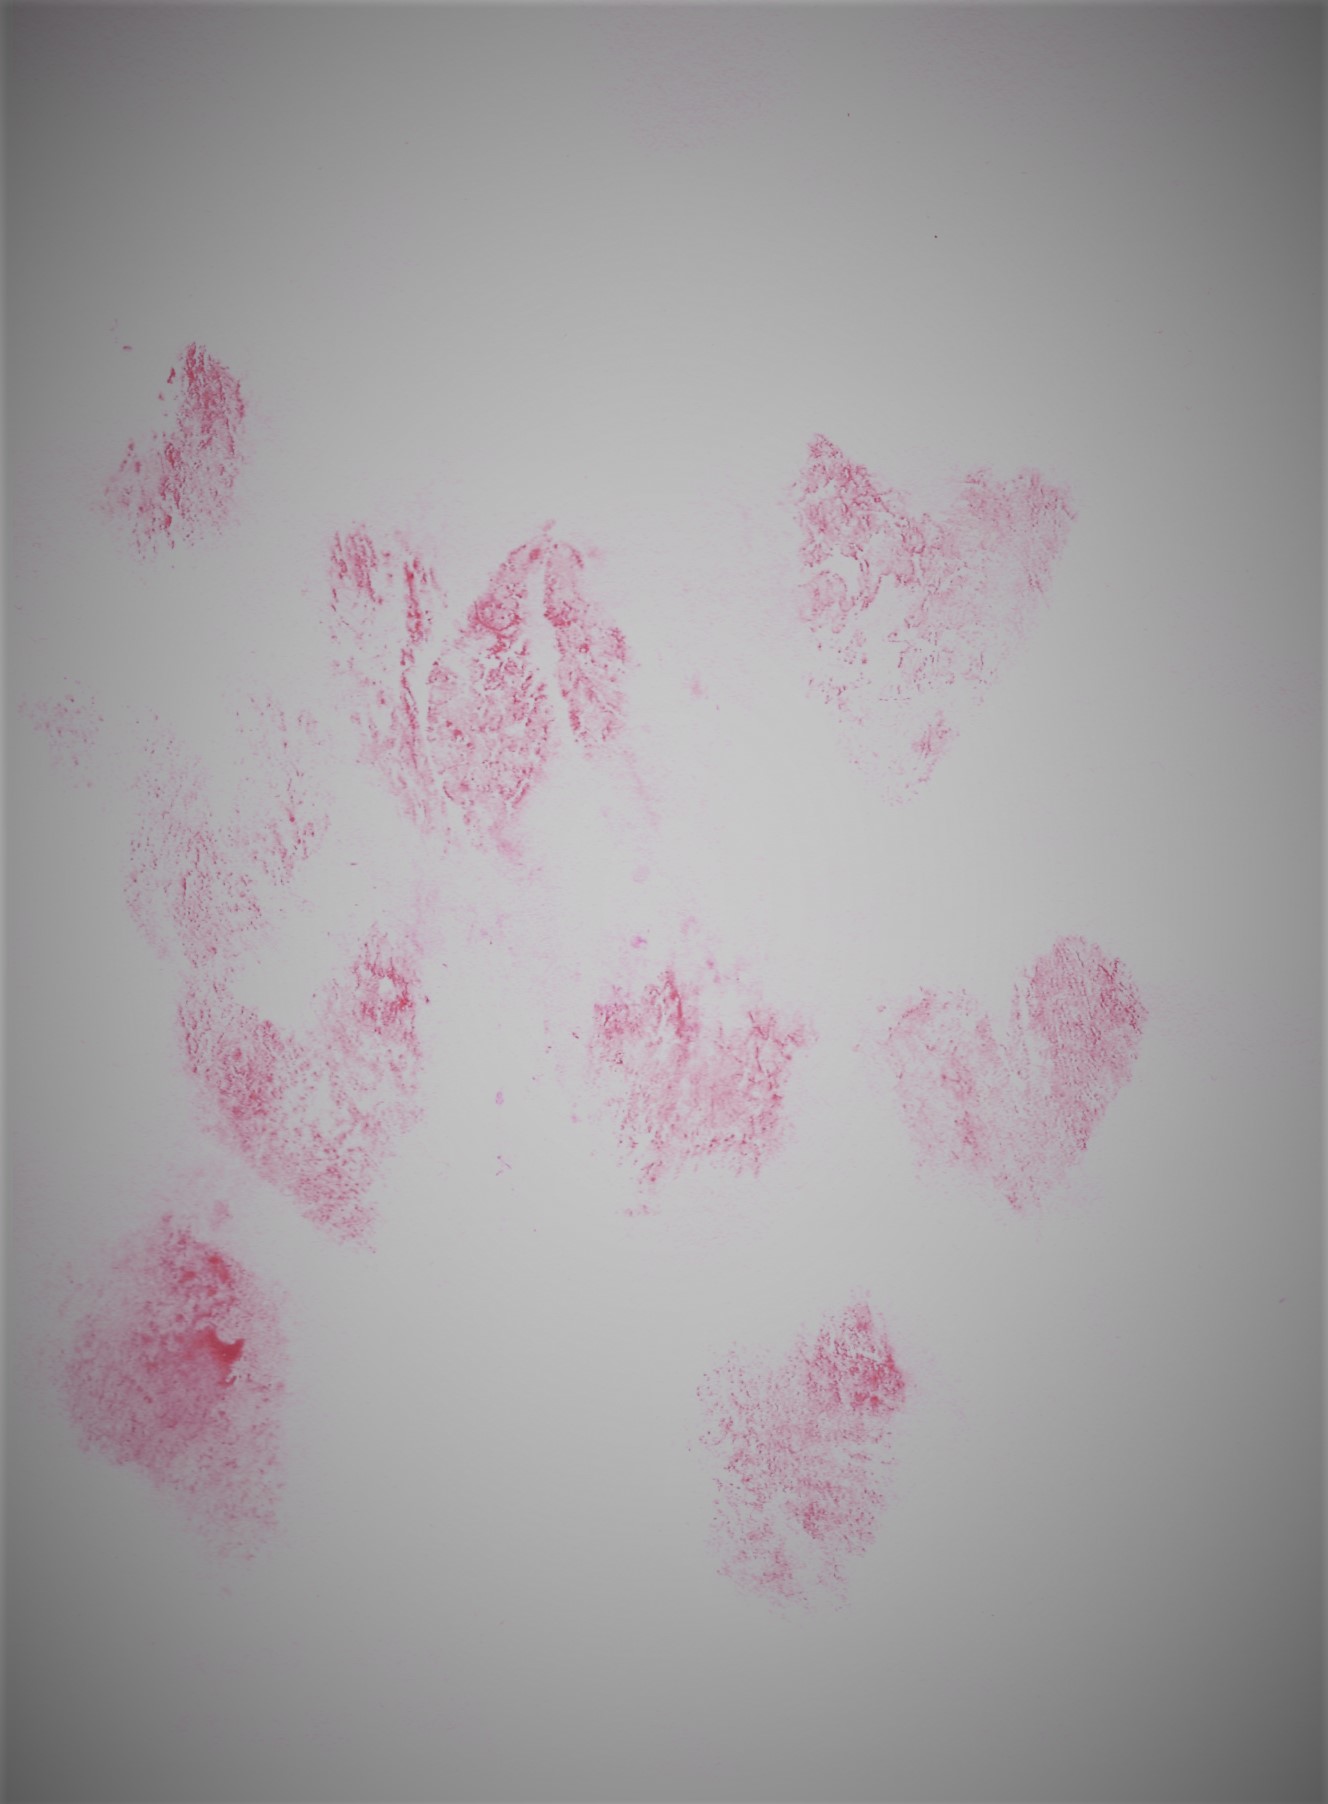 print of pink hearts painted on labia